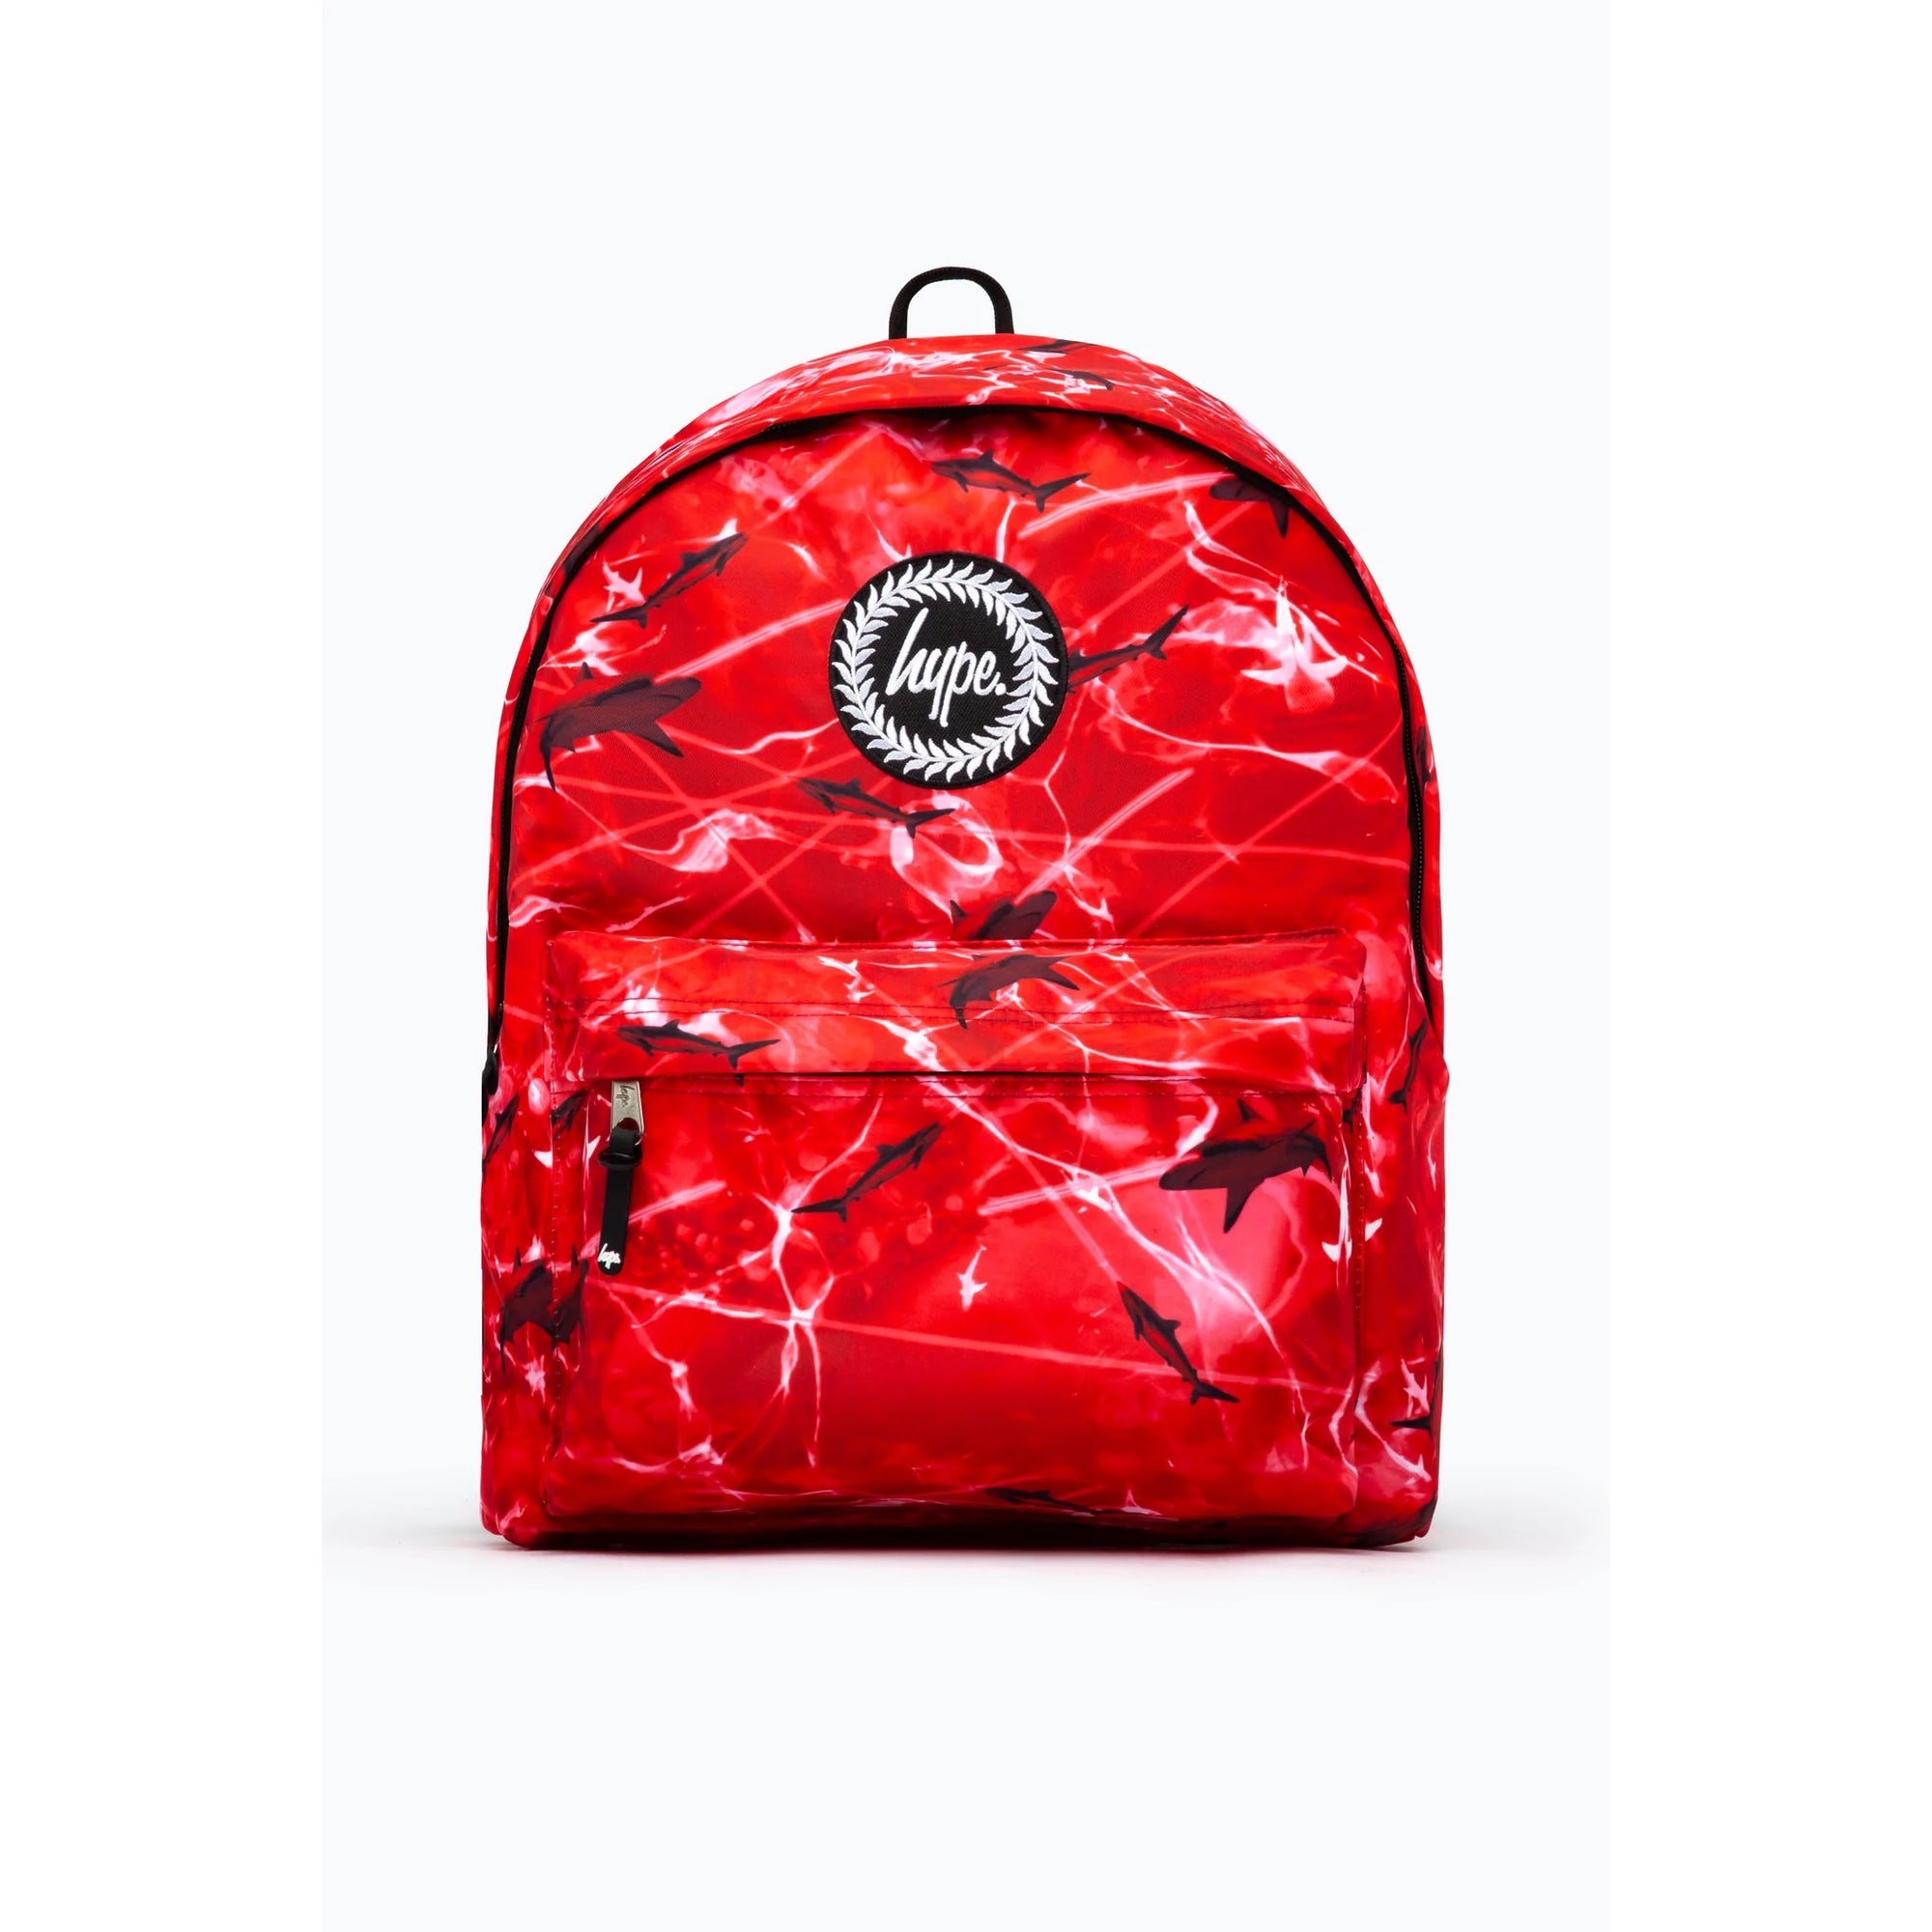 Hype Red Sea Shark Backpack Twlg-752 Accessories ONE SIZE / Red